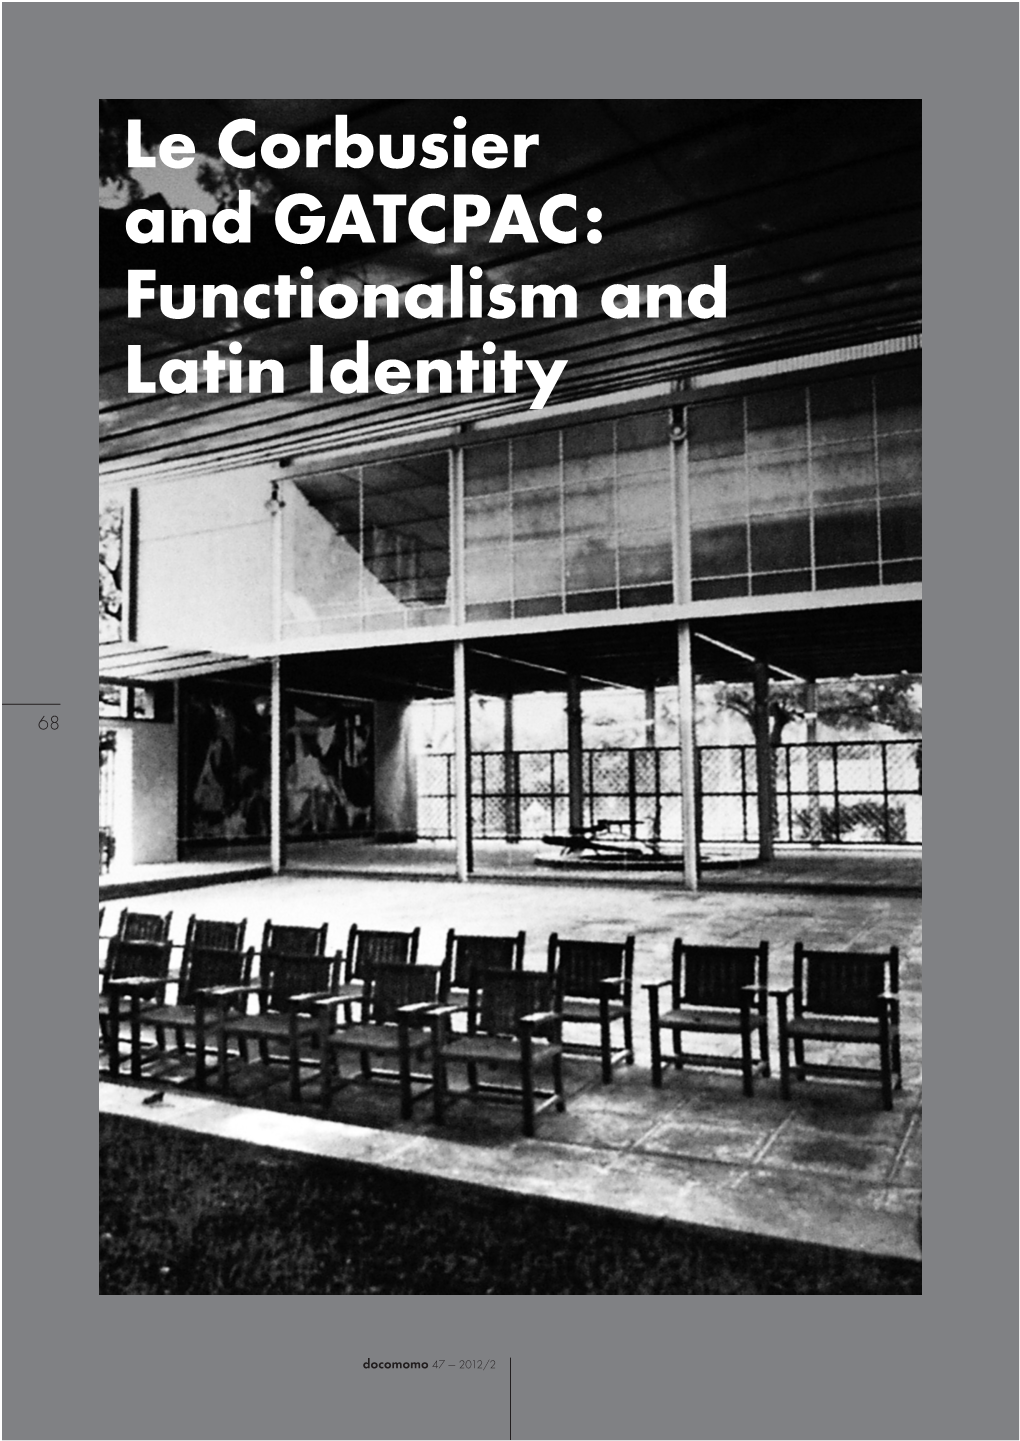 Le Corbusier and GATCPAC: Functionalism and Latin Identity